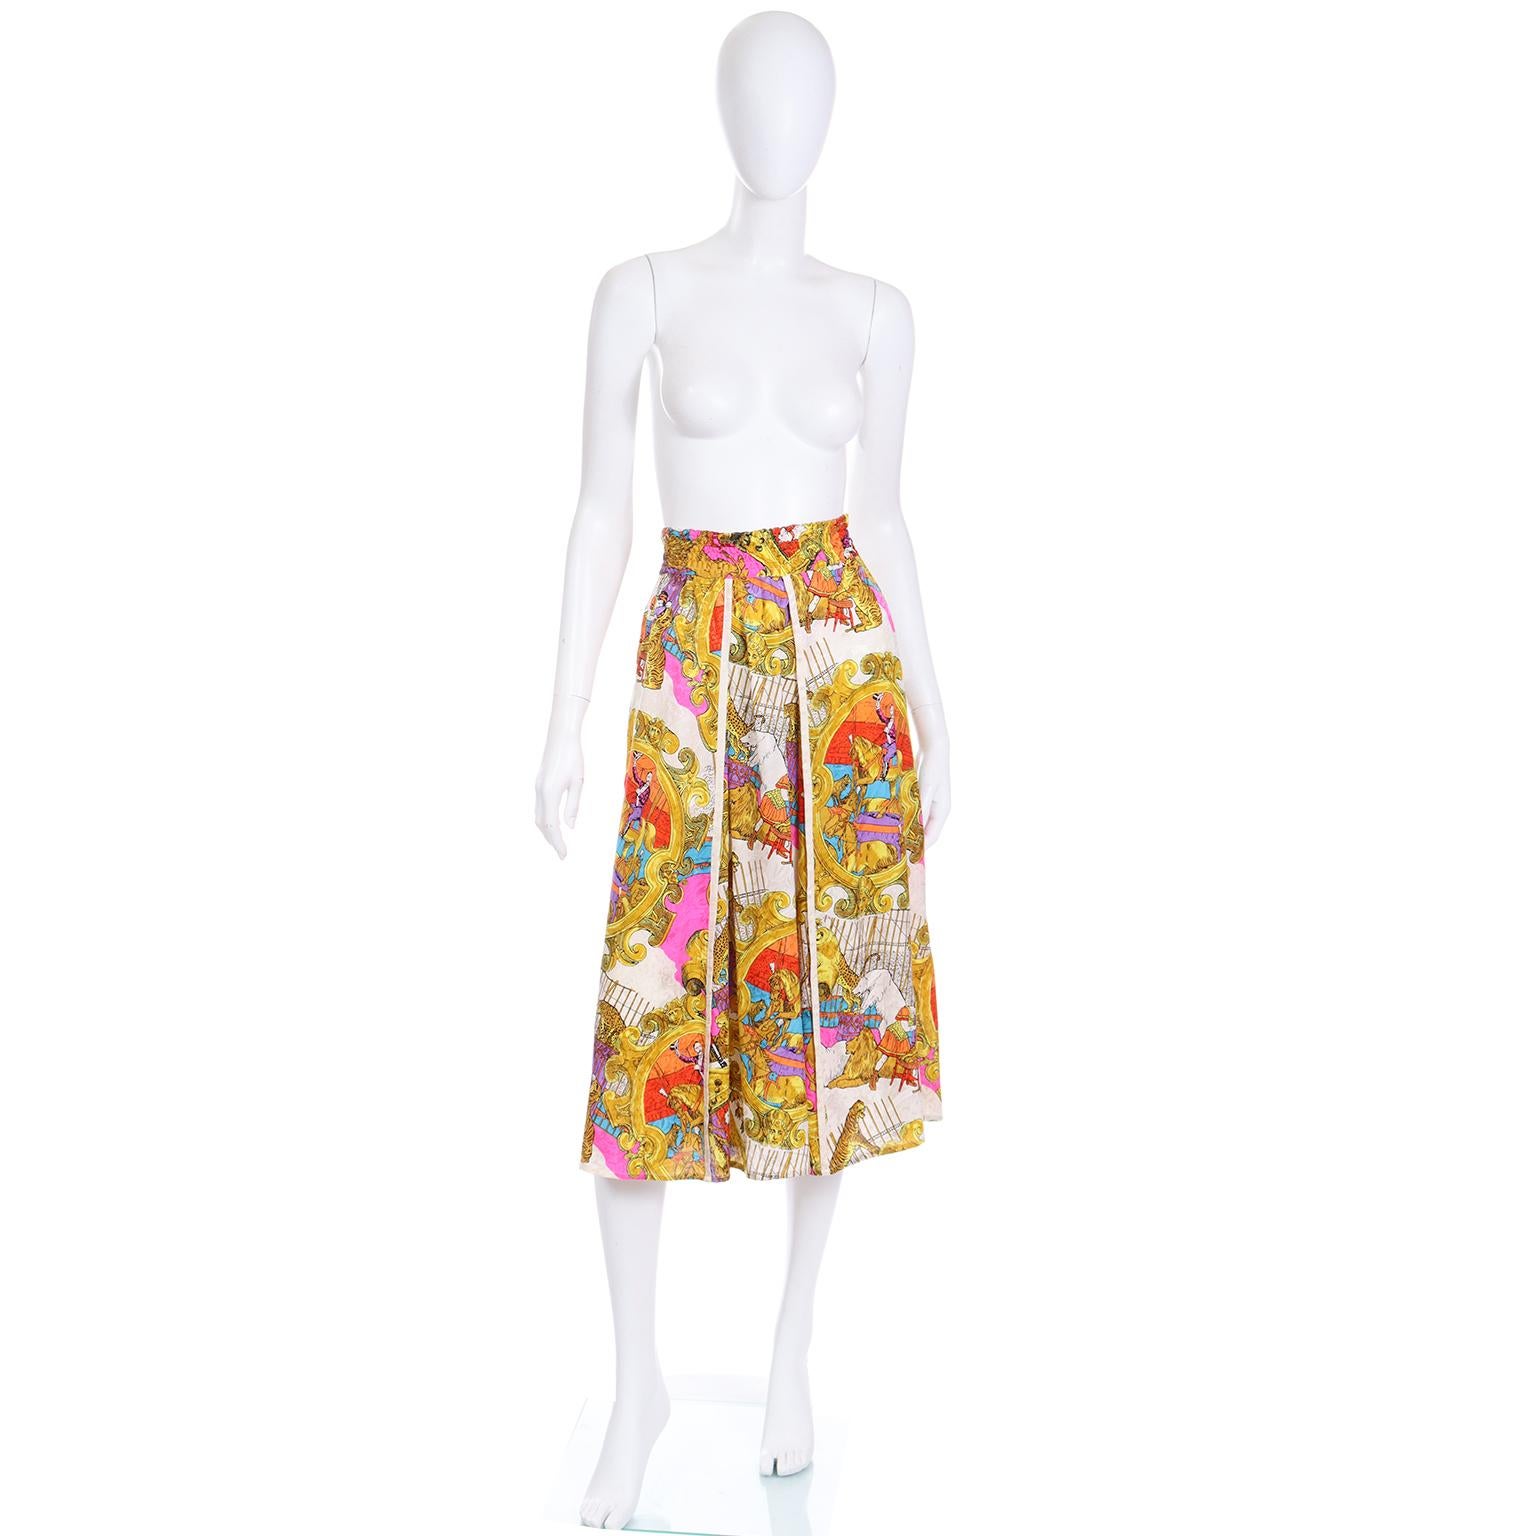 This is a fun vintage Diane Freis novelty circus print silk skirt with the Freis signature elastic waistband that fits a range of sizes. The skirt is a white jacquard tonal print featuring the circus including a ringmaster on a horse, tigers, lions,